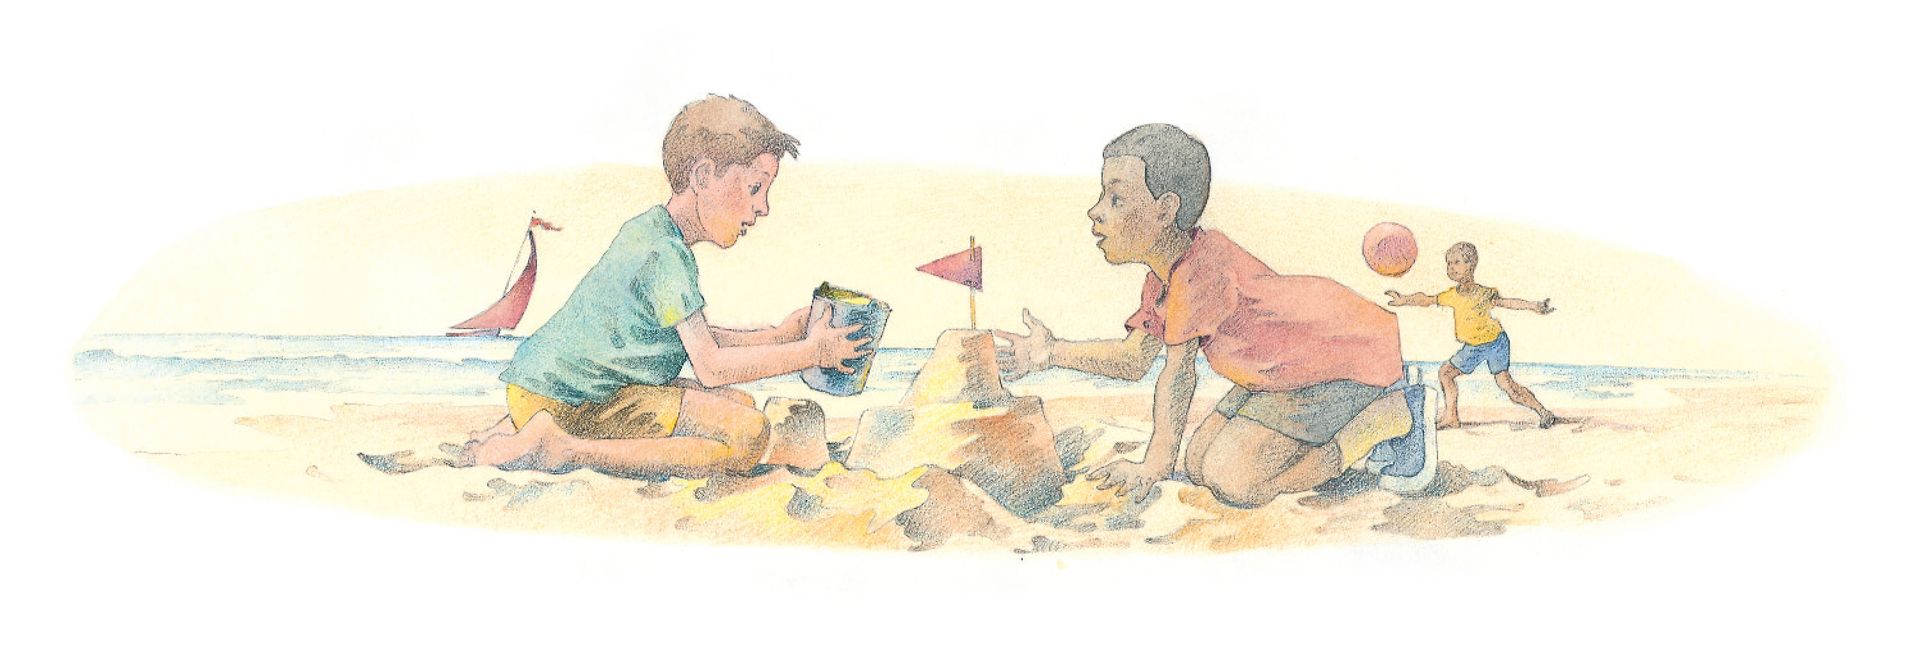 Two boys build a sand castle together on a beach. From the Children’s Songbook, page 263, “We Are Different”; watercolor illustration by Richard Hull.